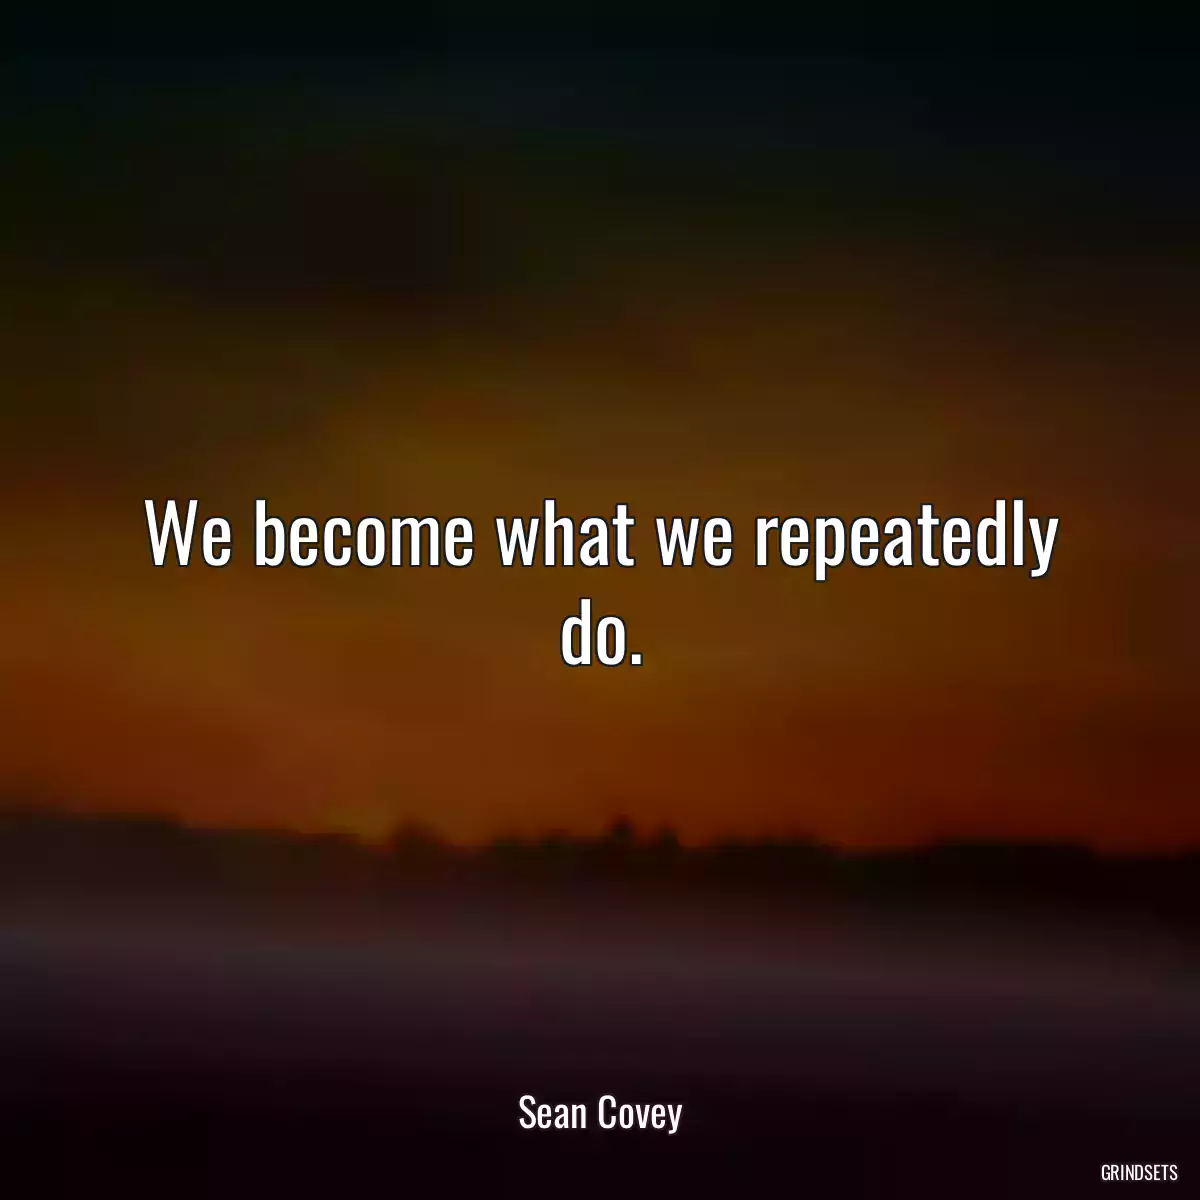 We become what we repeatedly do.